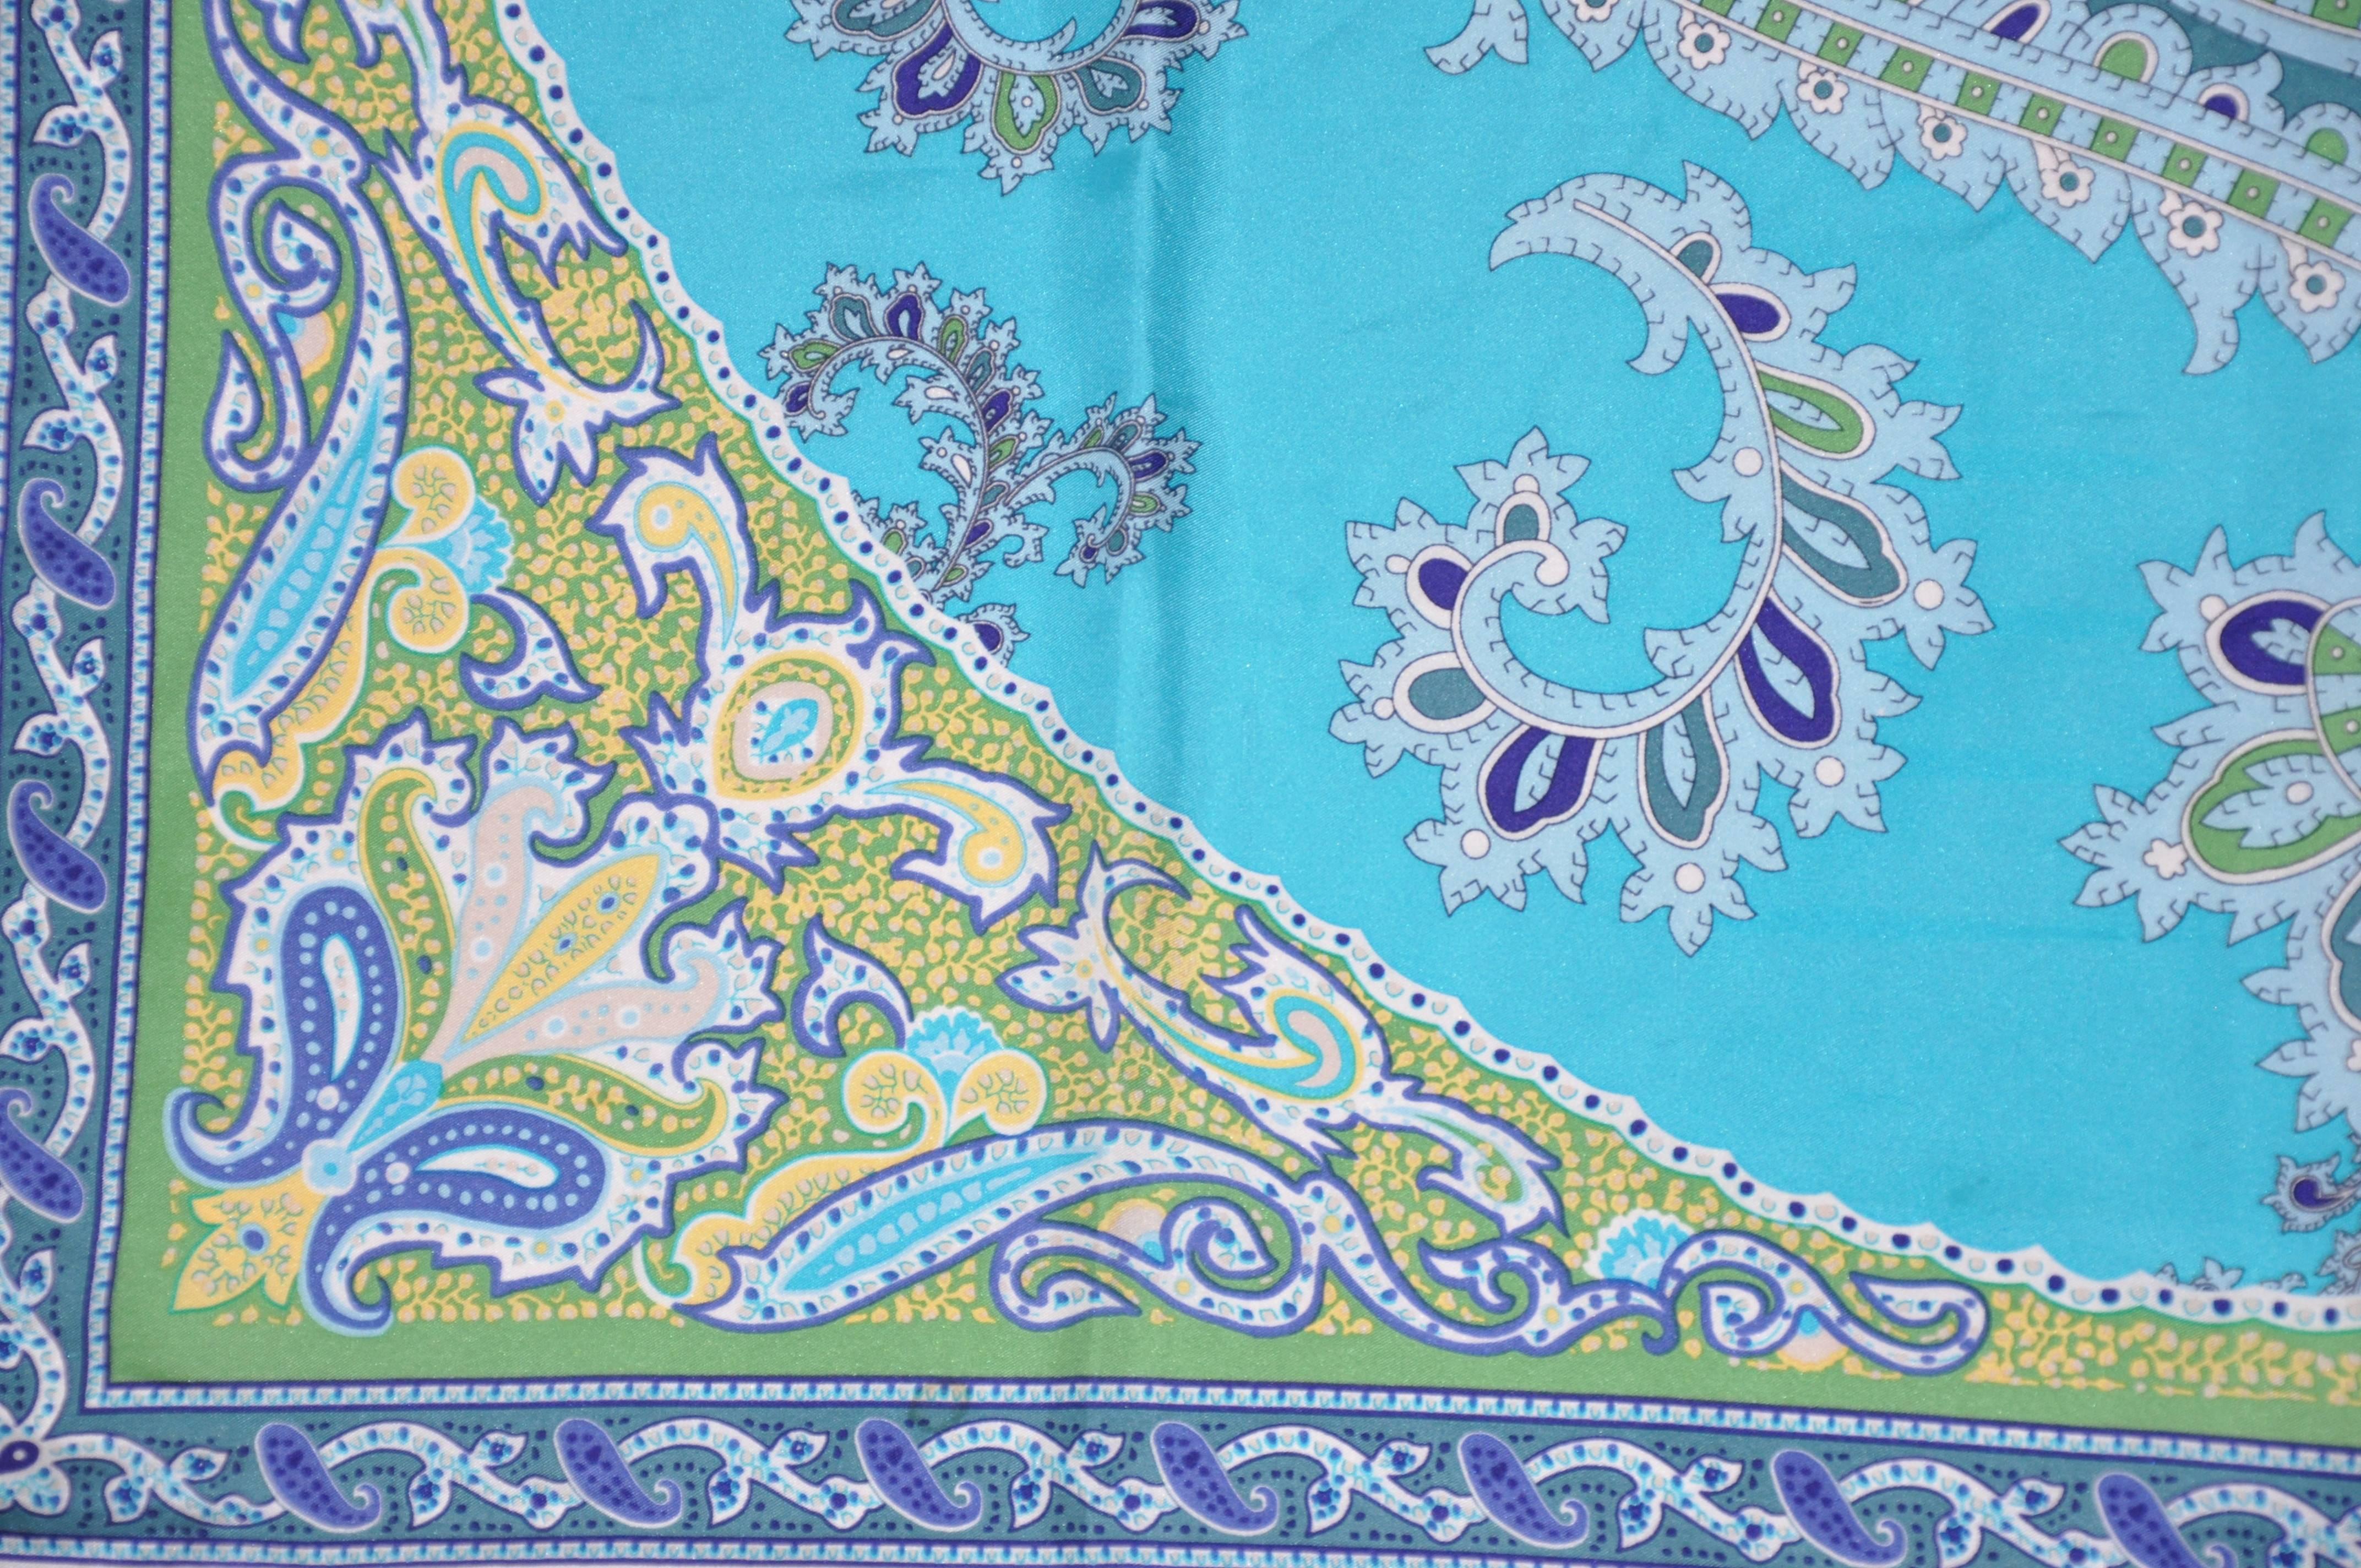 Women's or Men's Multiple Shades of Turquoise Paisley Surrounding Huge Paisley Center Silk Scarf